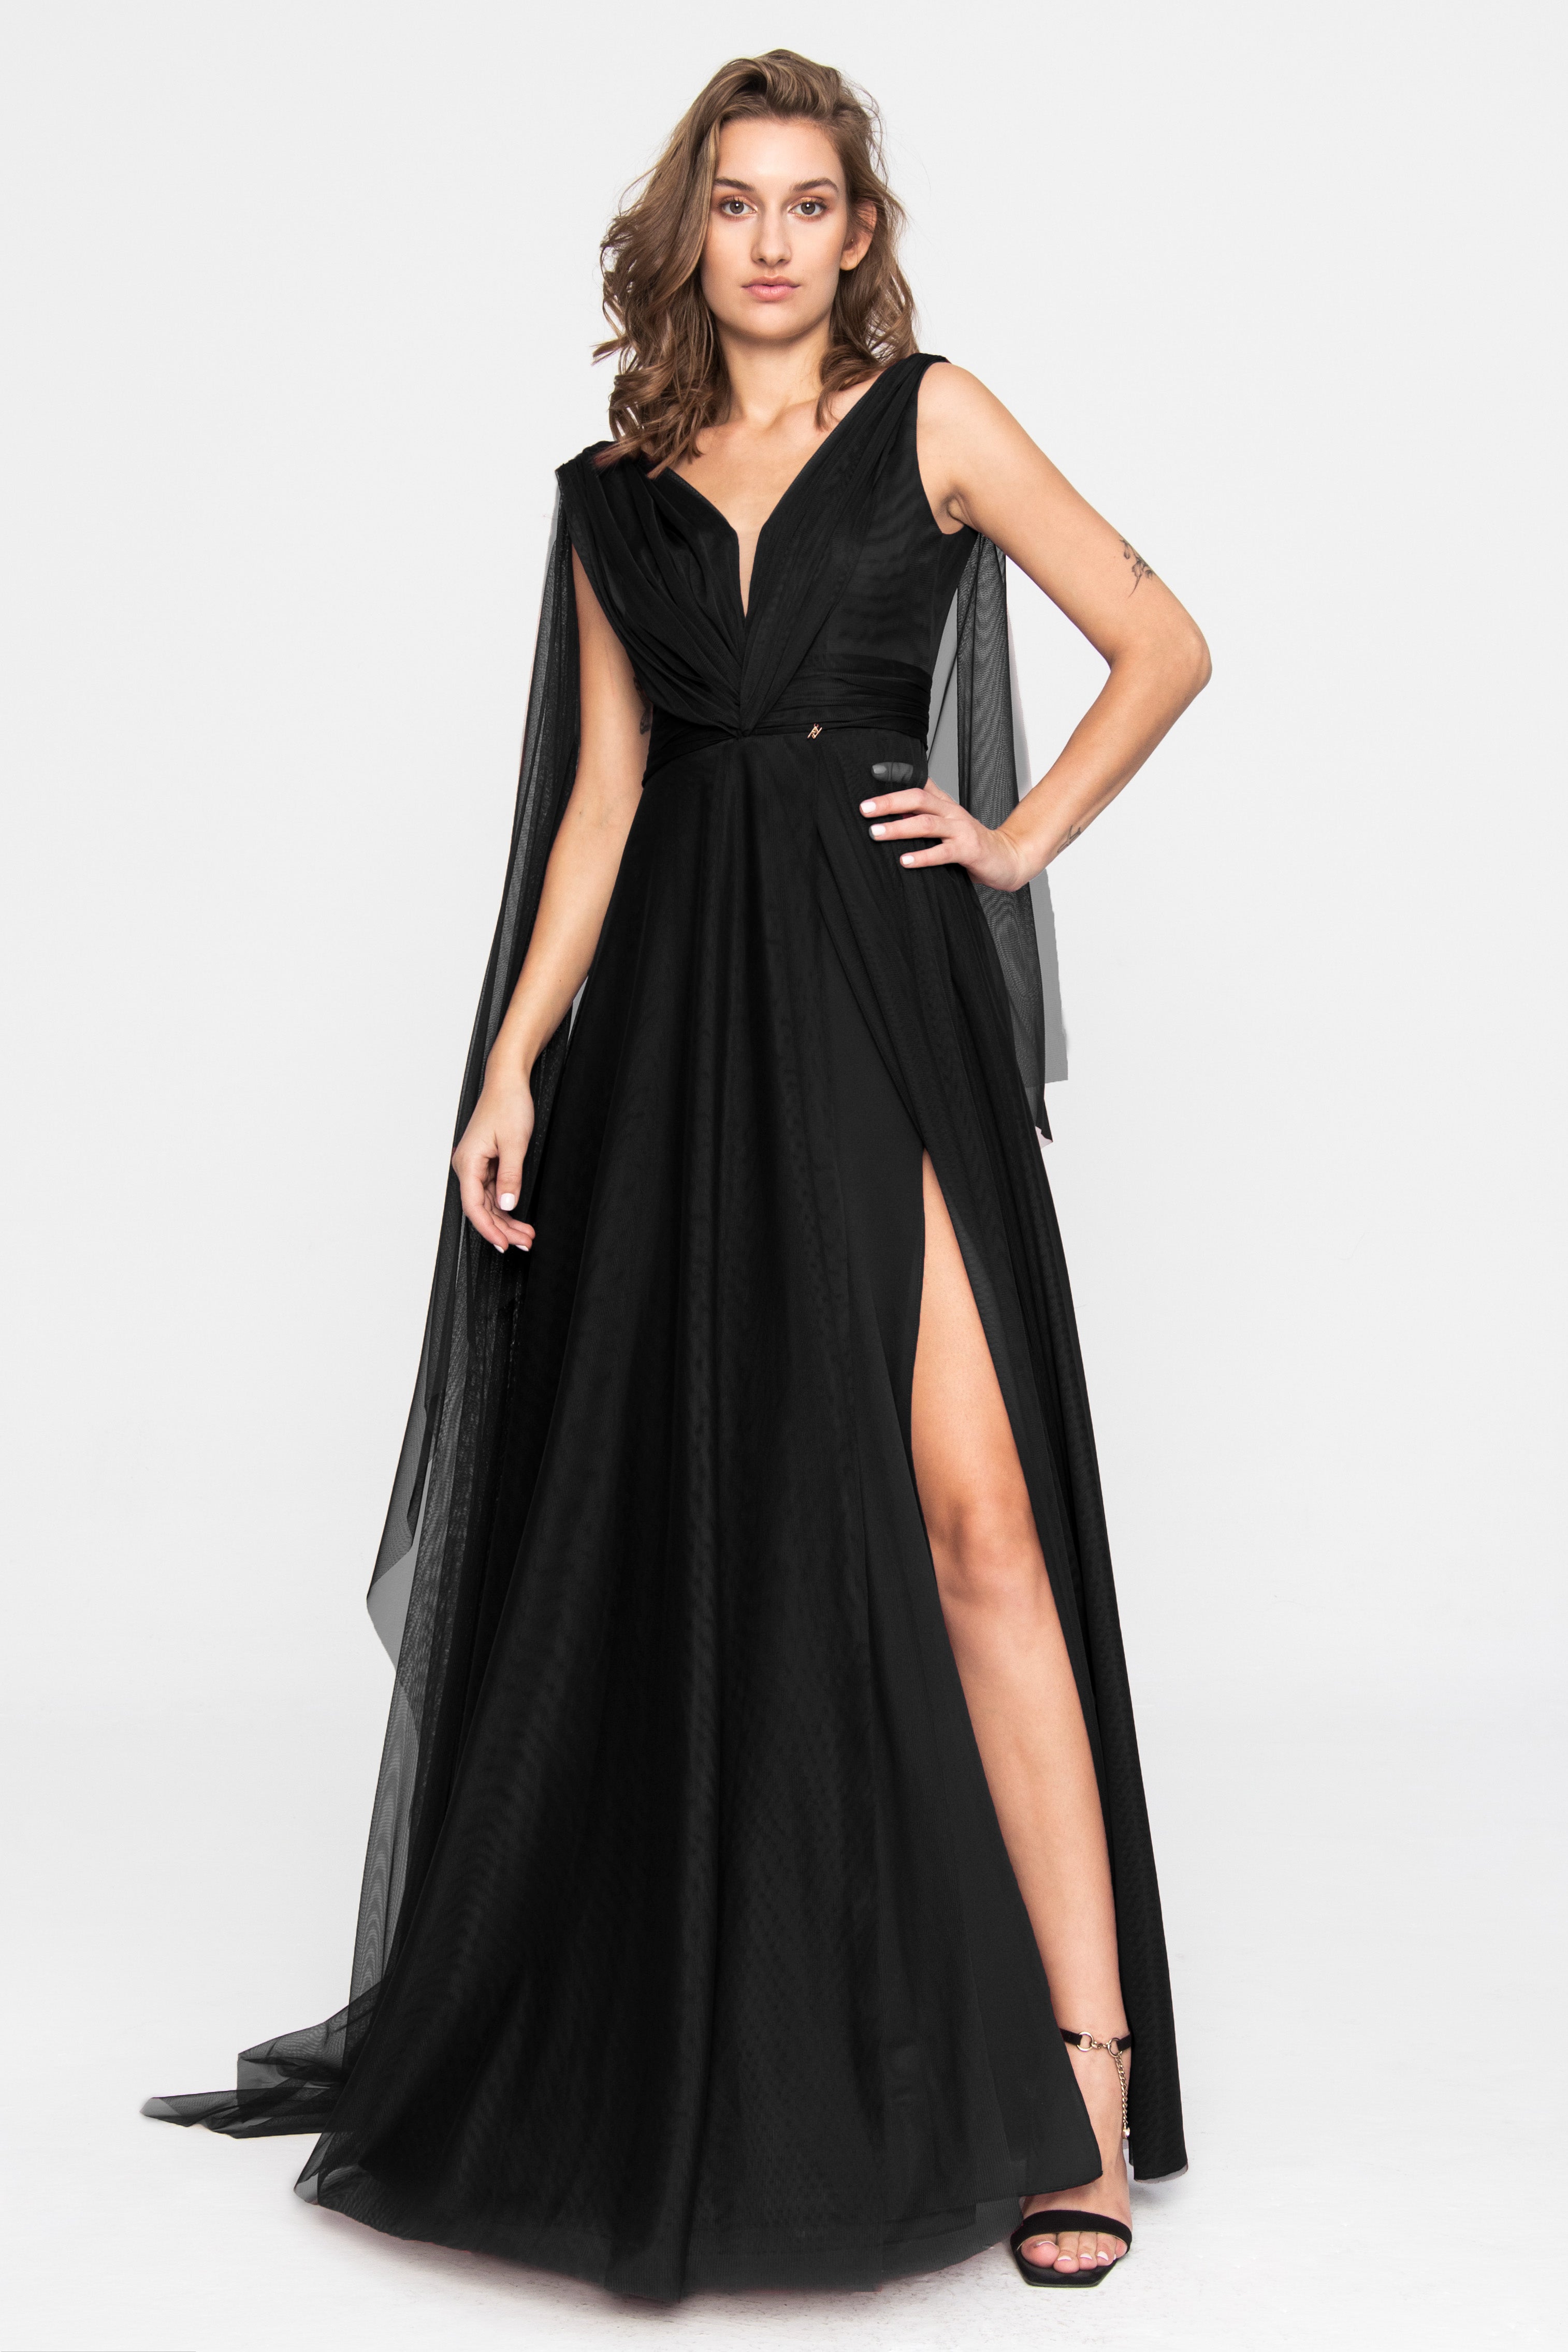 Tulle Terracotta Evening Gown Black